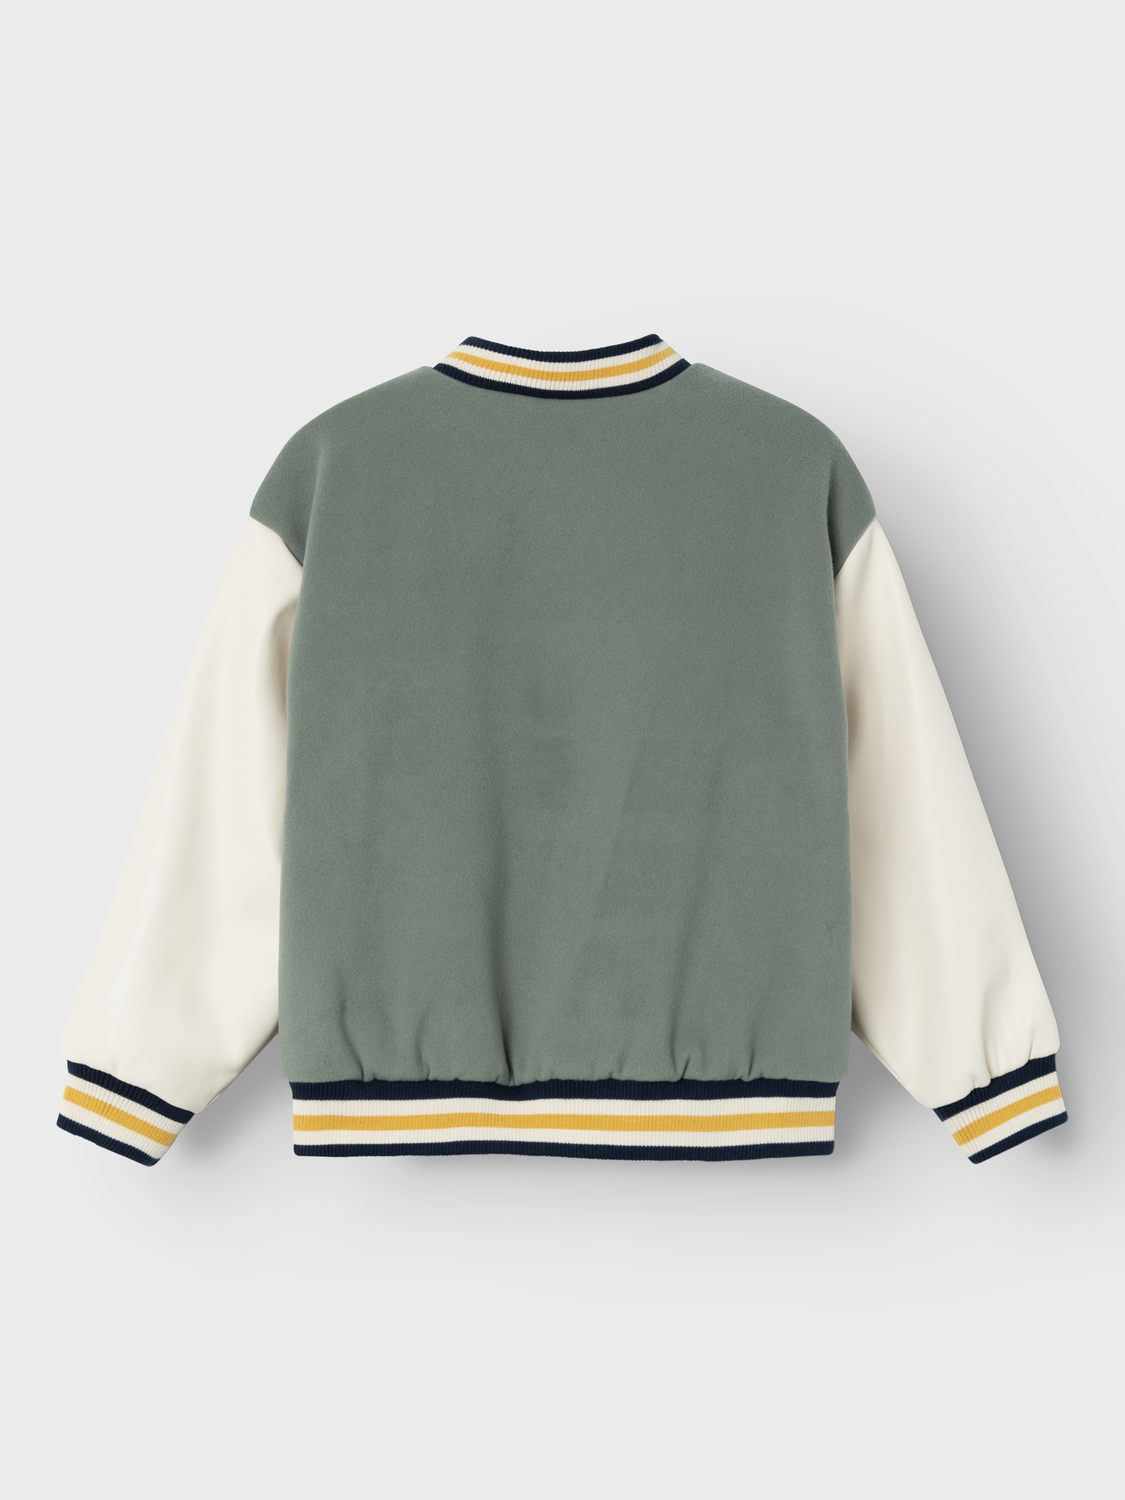 NKMMOMBY Outerwear - Agave Green